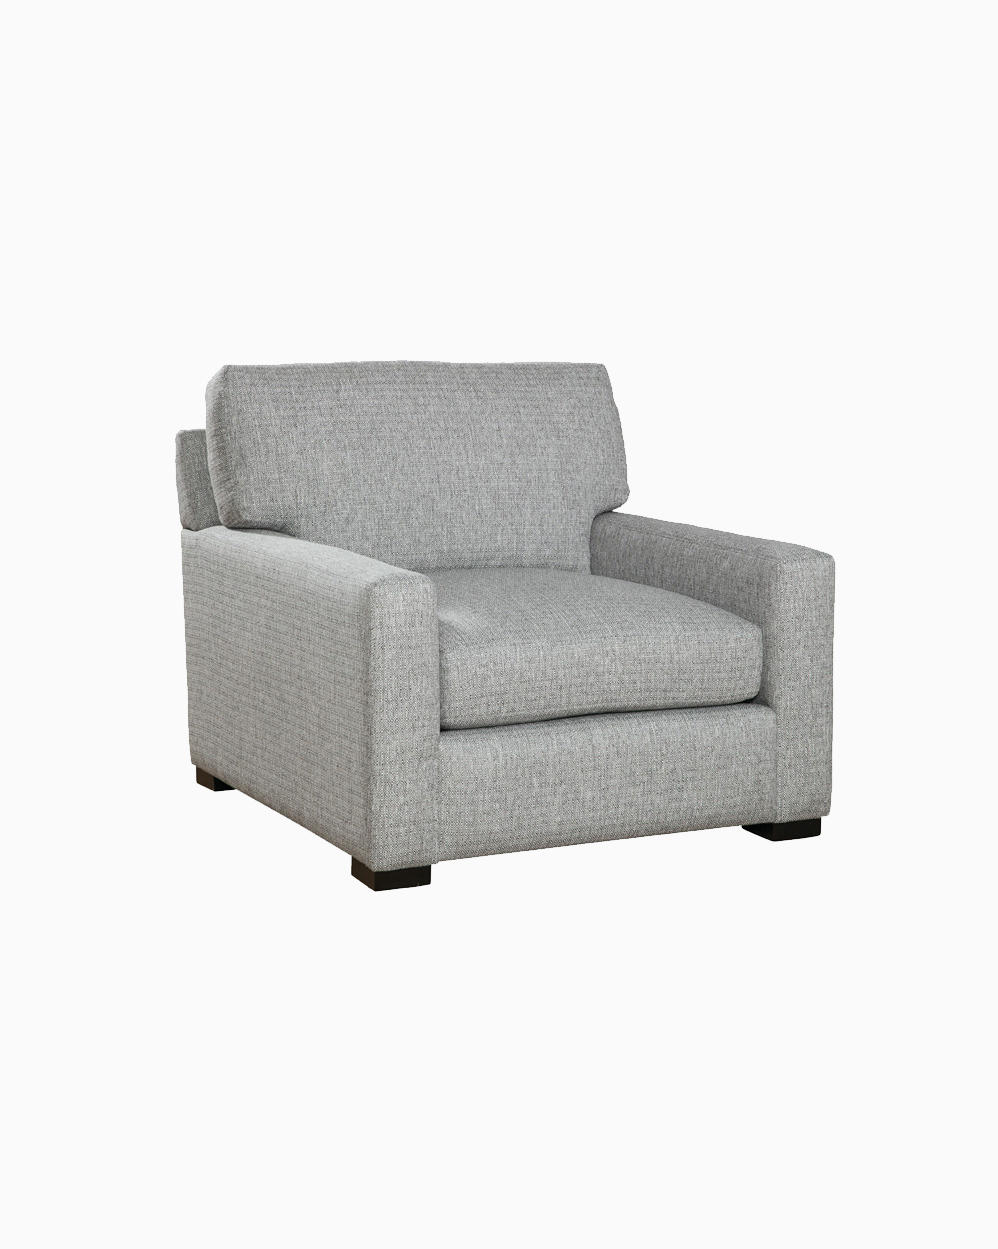 Spectra Emerson Chair